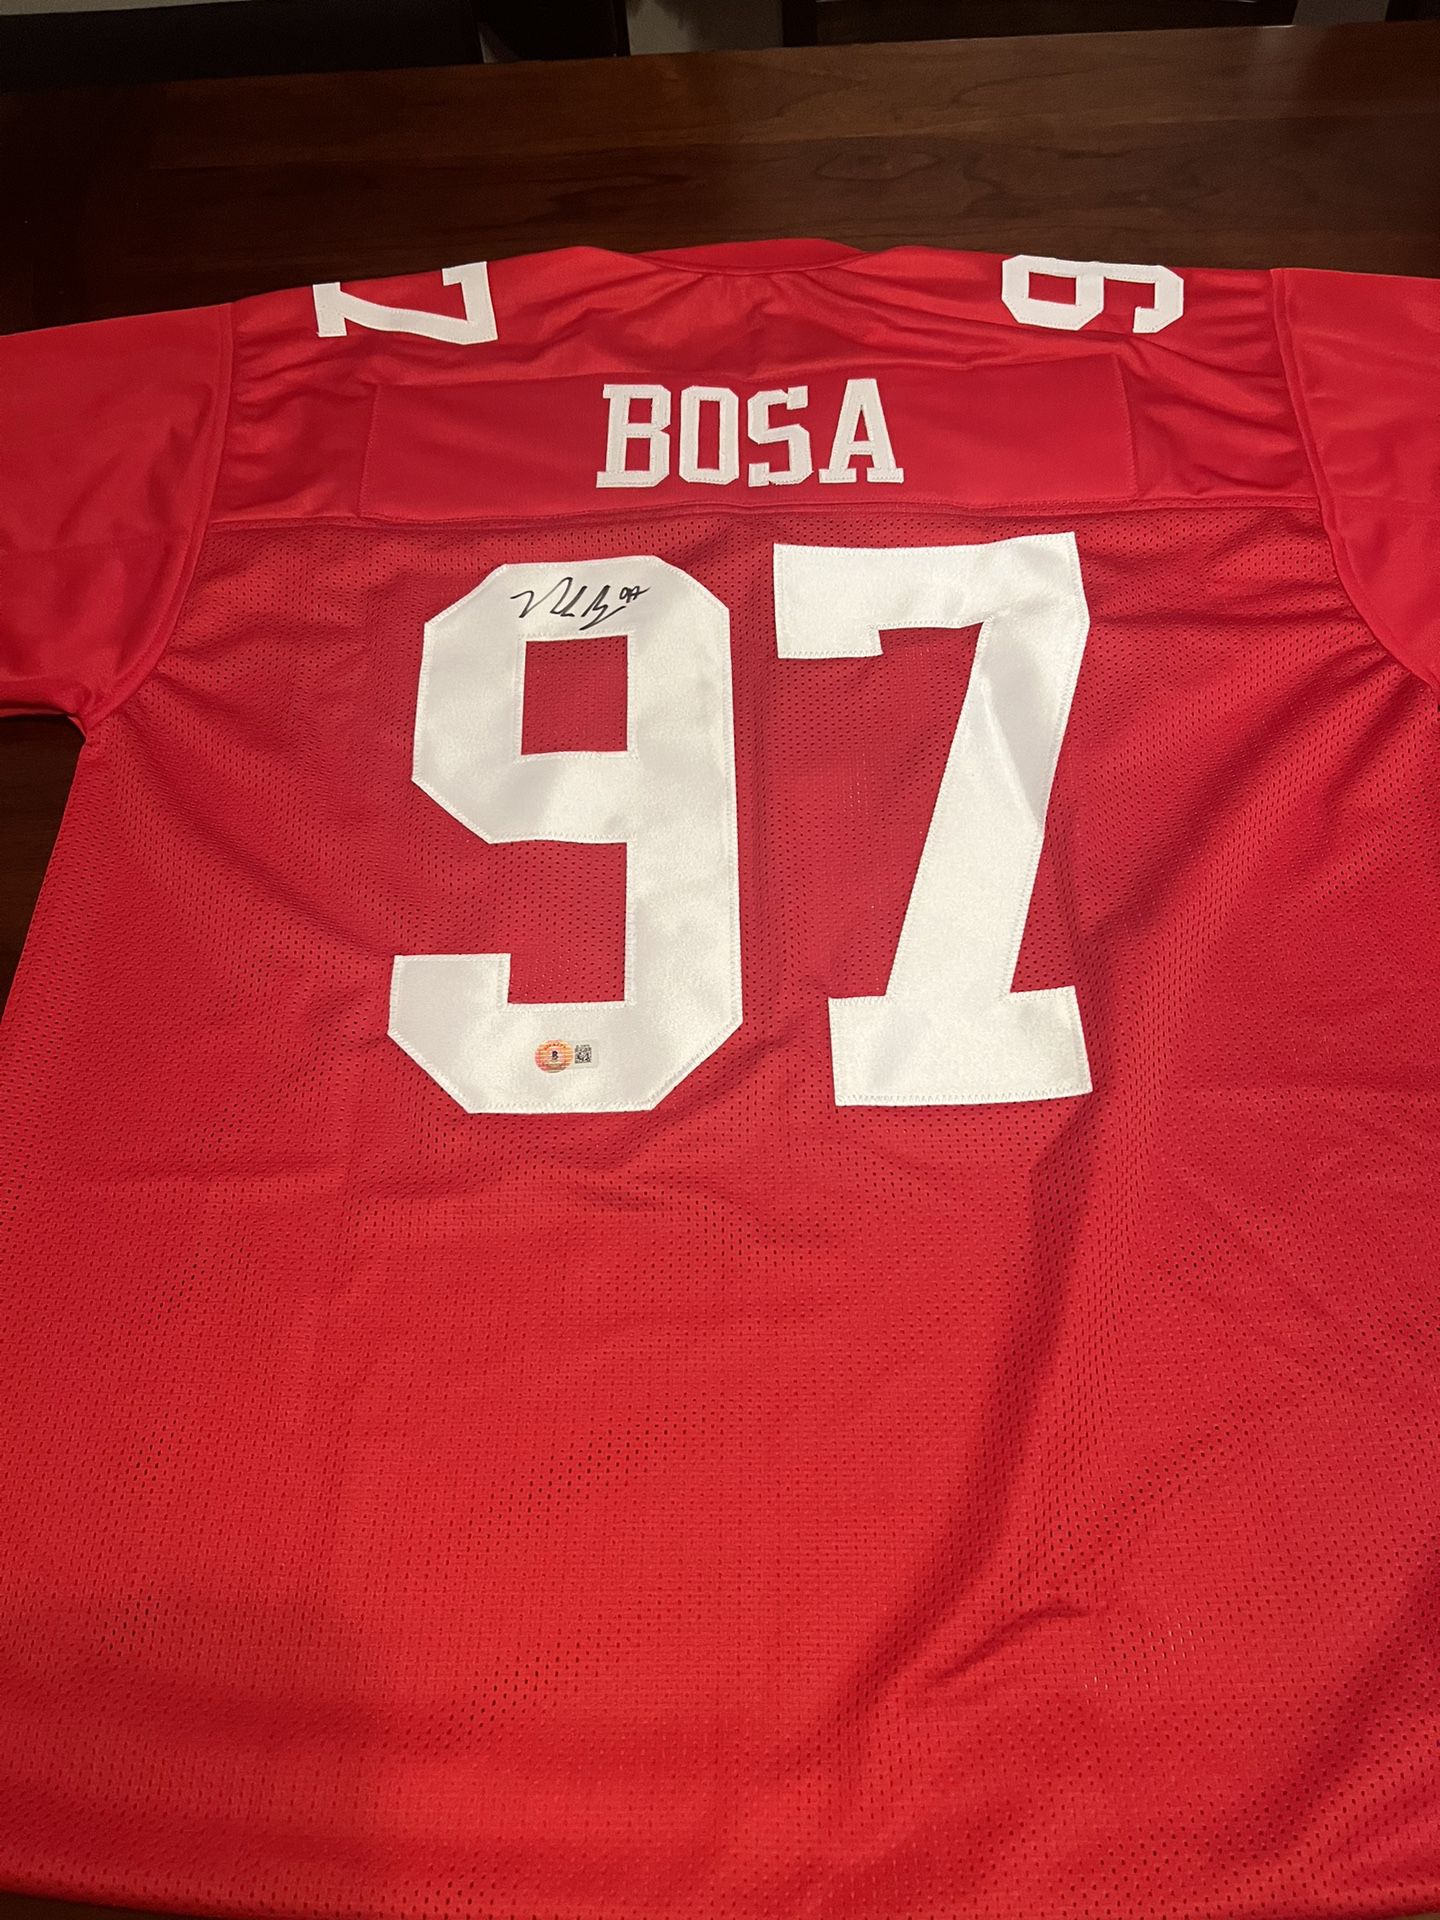 Nick Bosa Signed 49Ers Jersey. Comes With Coa.